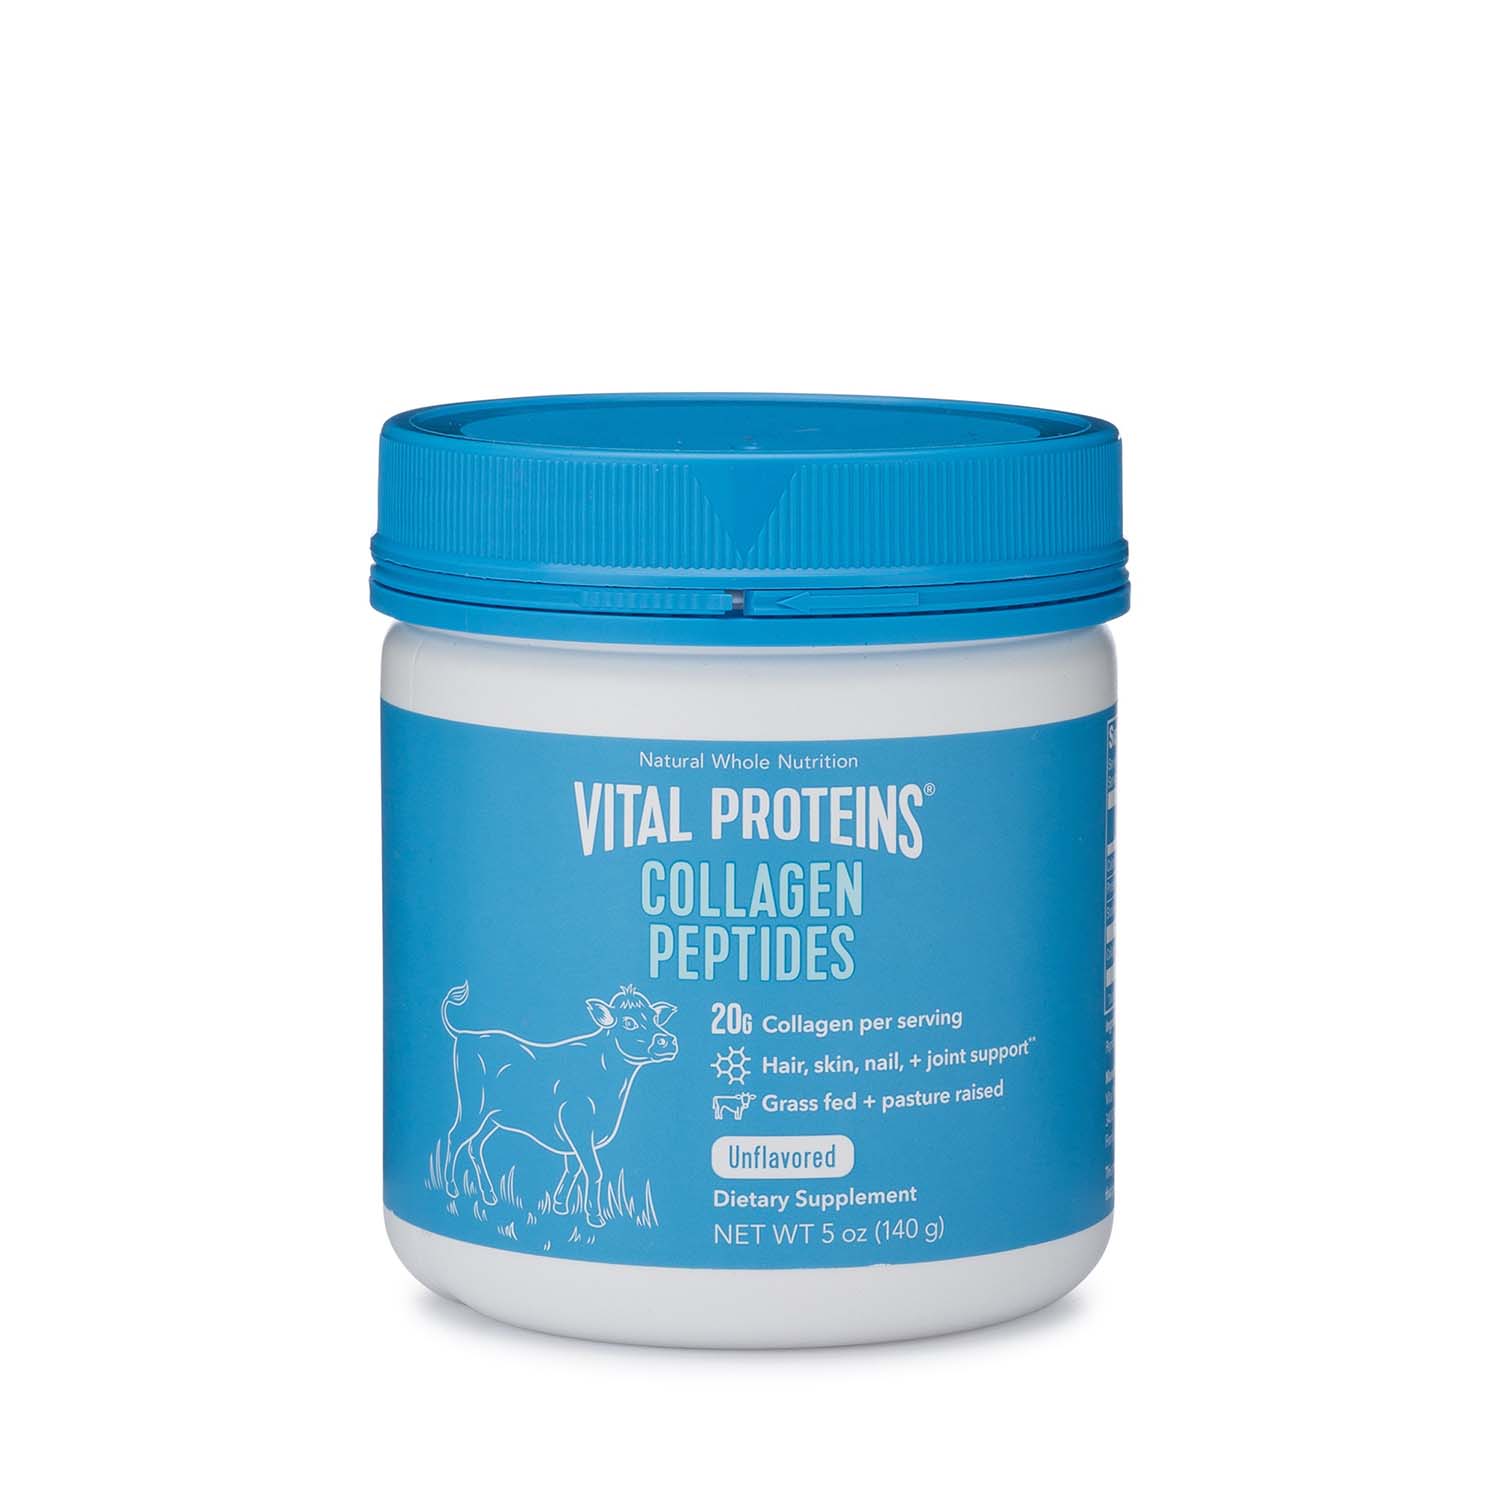 Vital Proteins Collagen Peptides Unflavored 5 Oz Gnc,Patio Yard Patio Backyard Landscaping Ideas